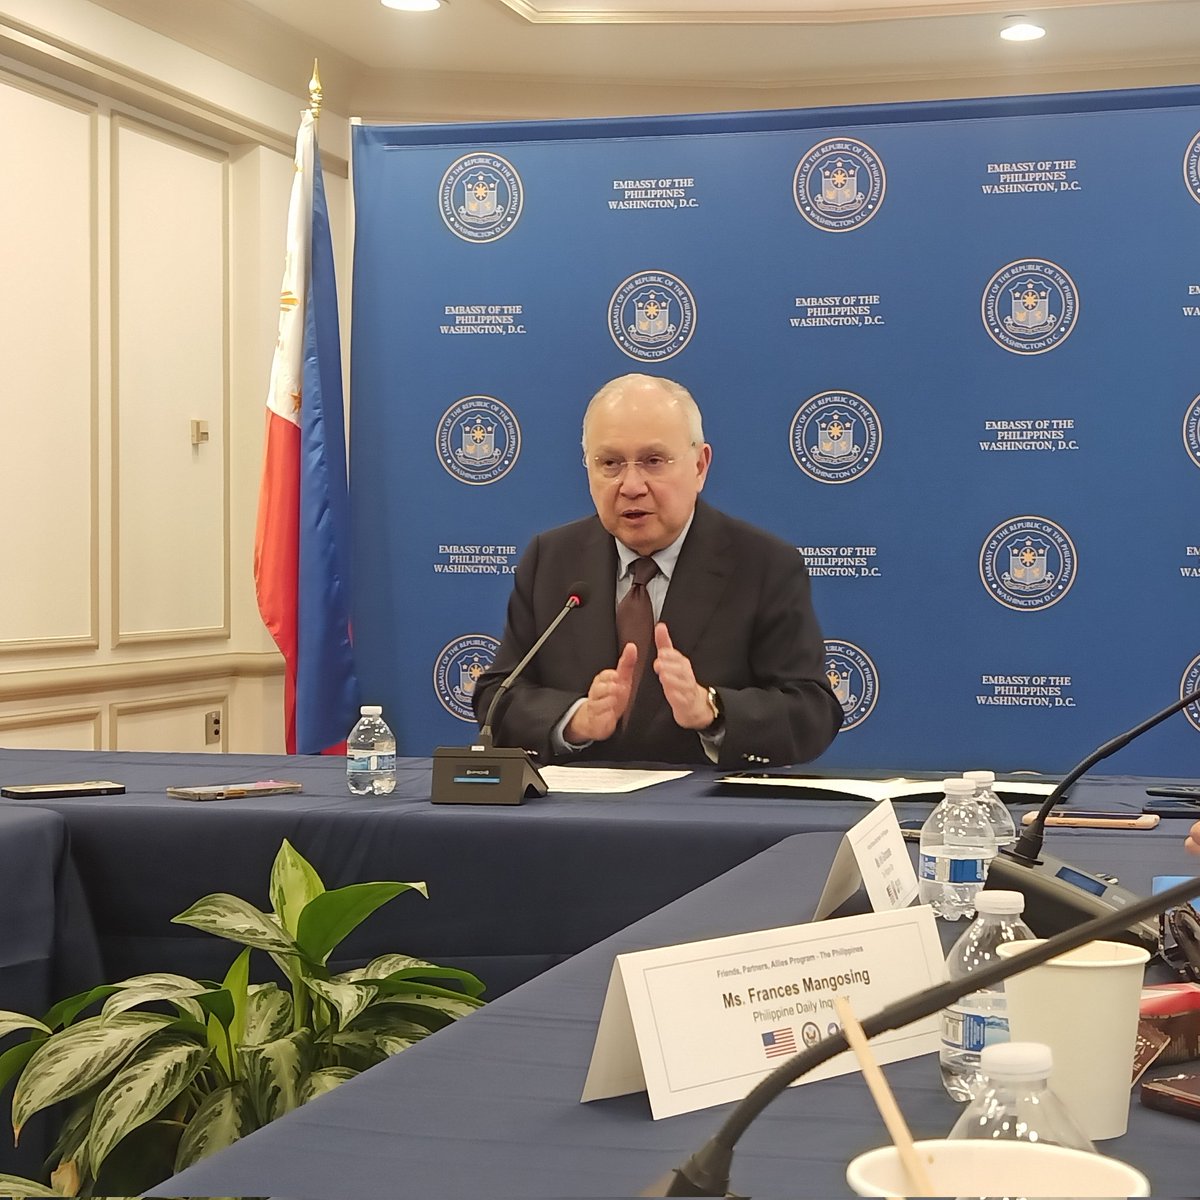 BREAKING: PH, US agree to work together to counter China's 'information manipulation' in West Philippine Sea, says PH Ambassador to US Jose Manuel Romualdez. Deal was struck during the conclusion of 2-day Bilateral Security Dialogue here in Washington D.C. @manilabulletin